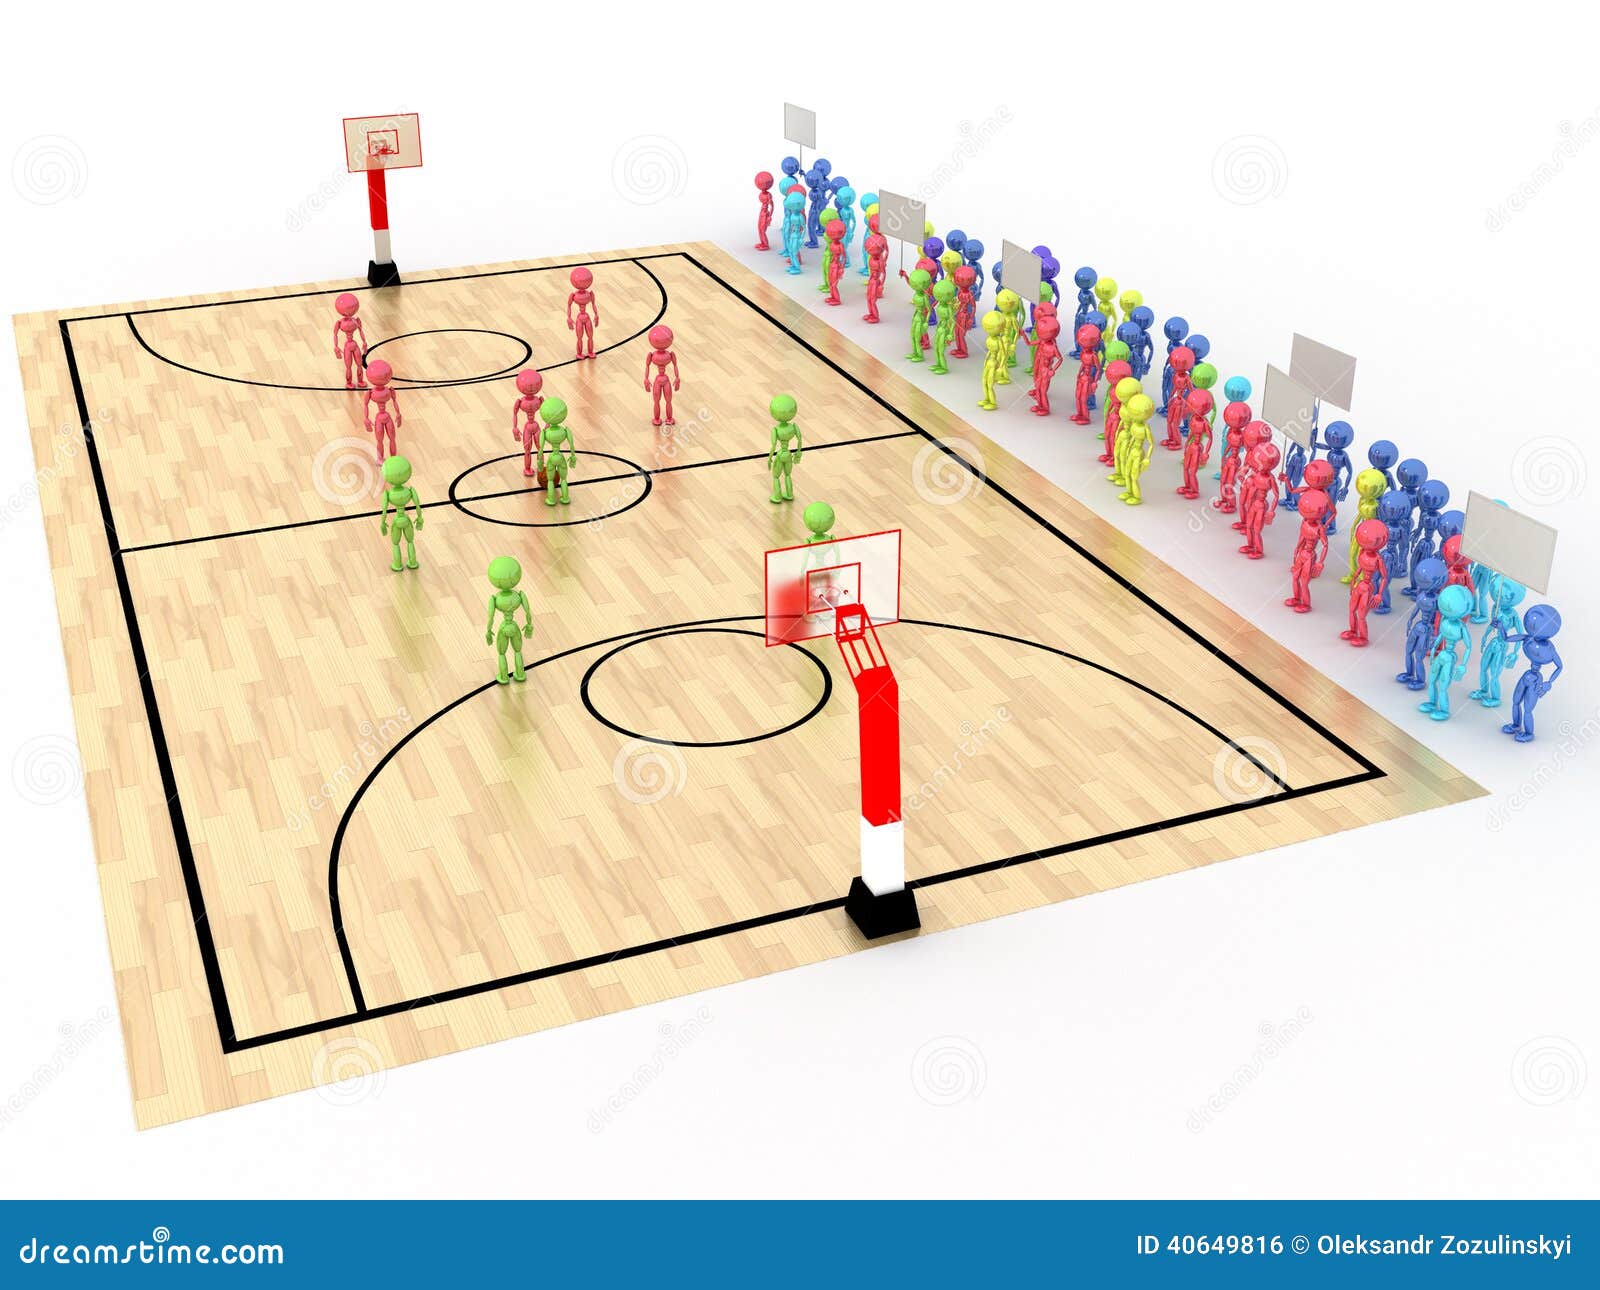 Basketball Court With Players And Spectators №2 Stock Illustration